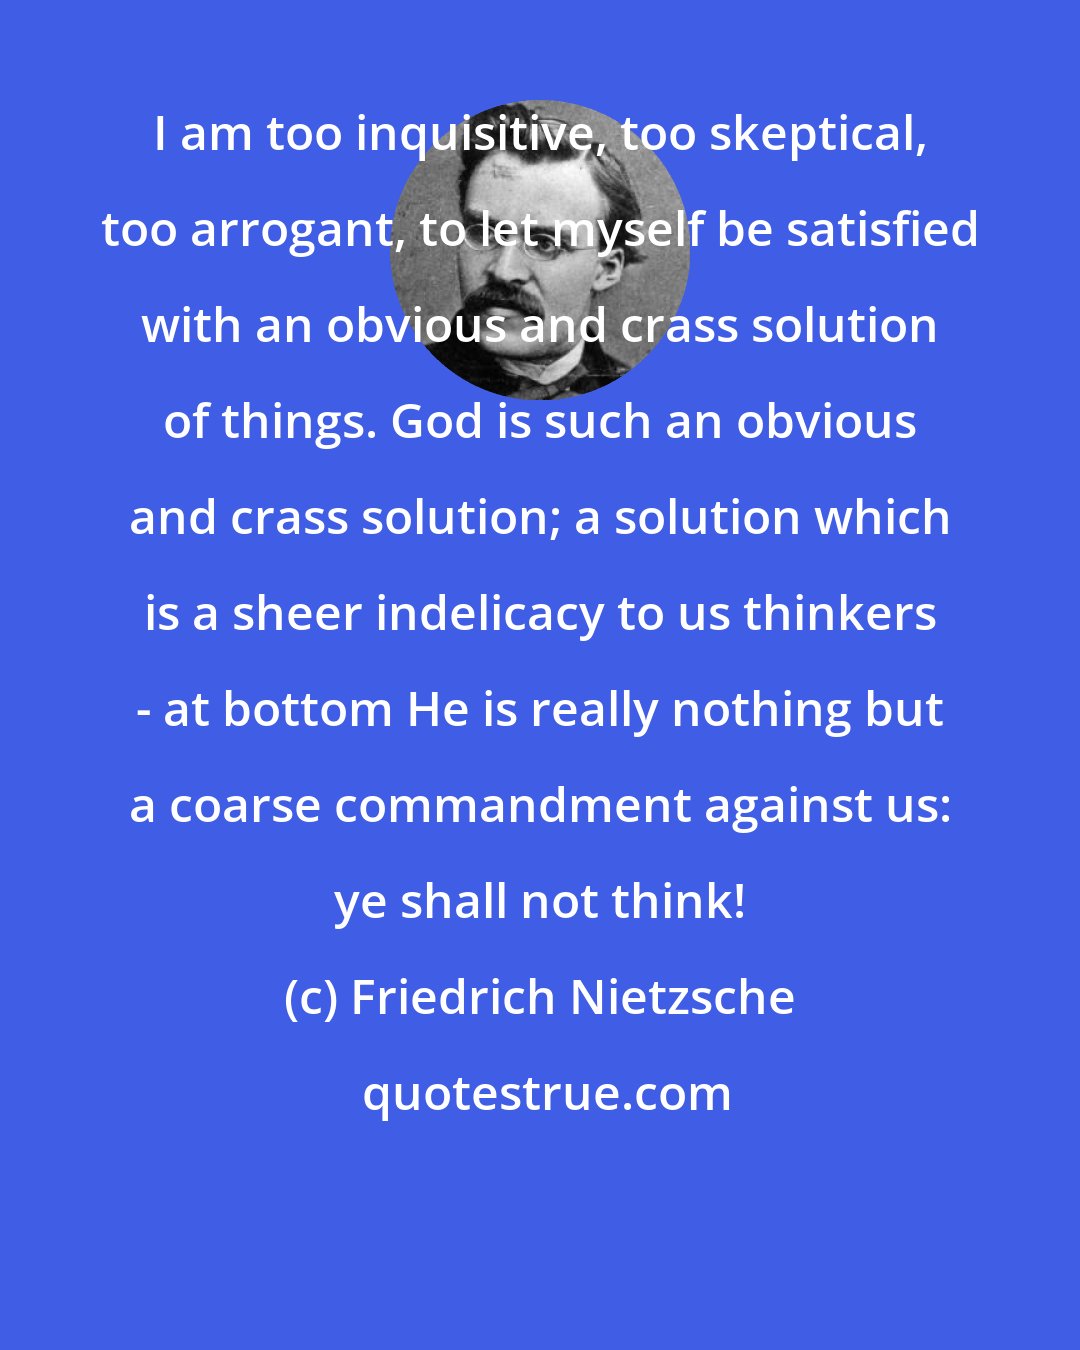 Friedrich Nietzsche: I am too inquisitive, too skeptical, too arrogant, to let myself be satisfied with an obvious and crass solution of things. God is such an obvious and crass solution; a solution which is a sheer indelicacy to us thinkers - at bottom He is really nothing but a coarse commandment against us: ye shall not think!